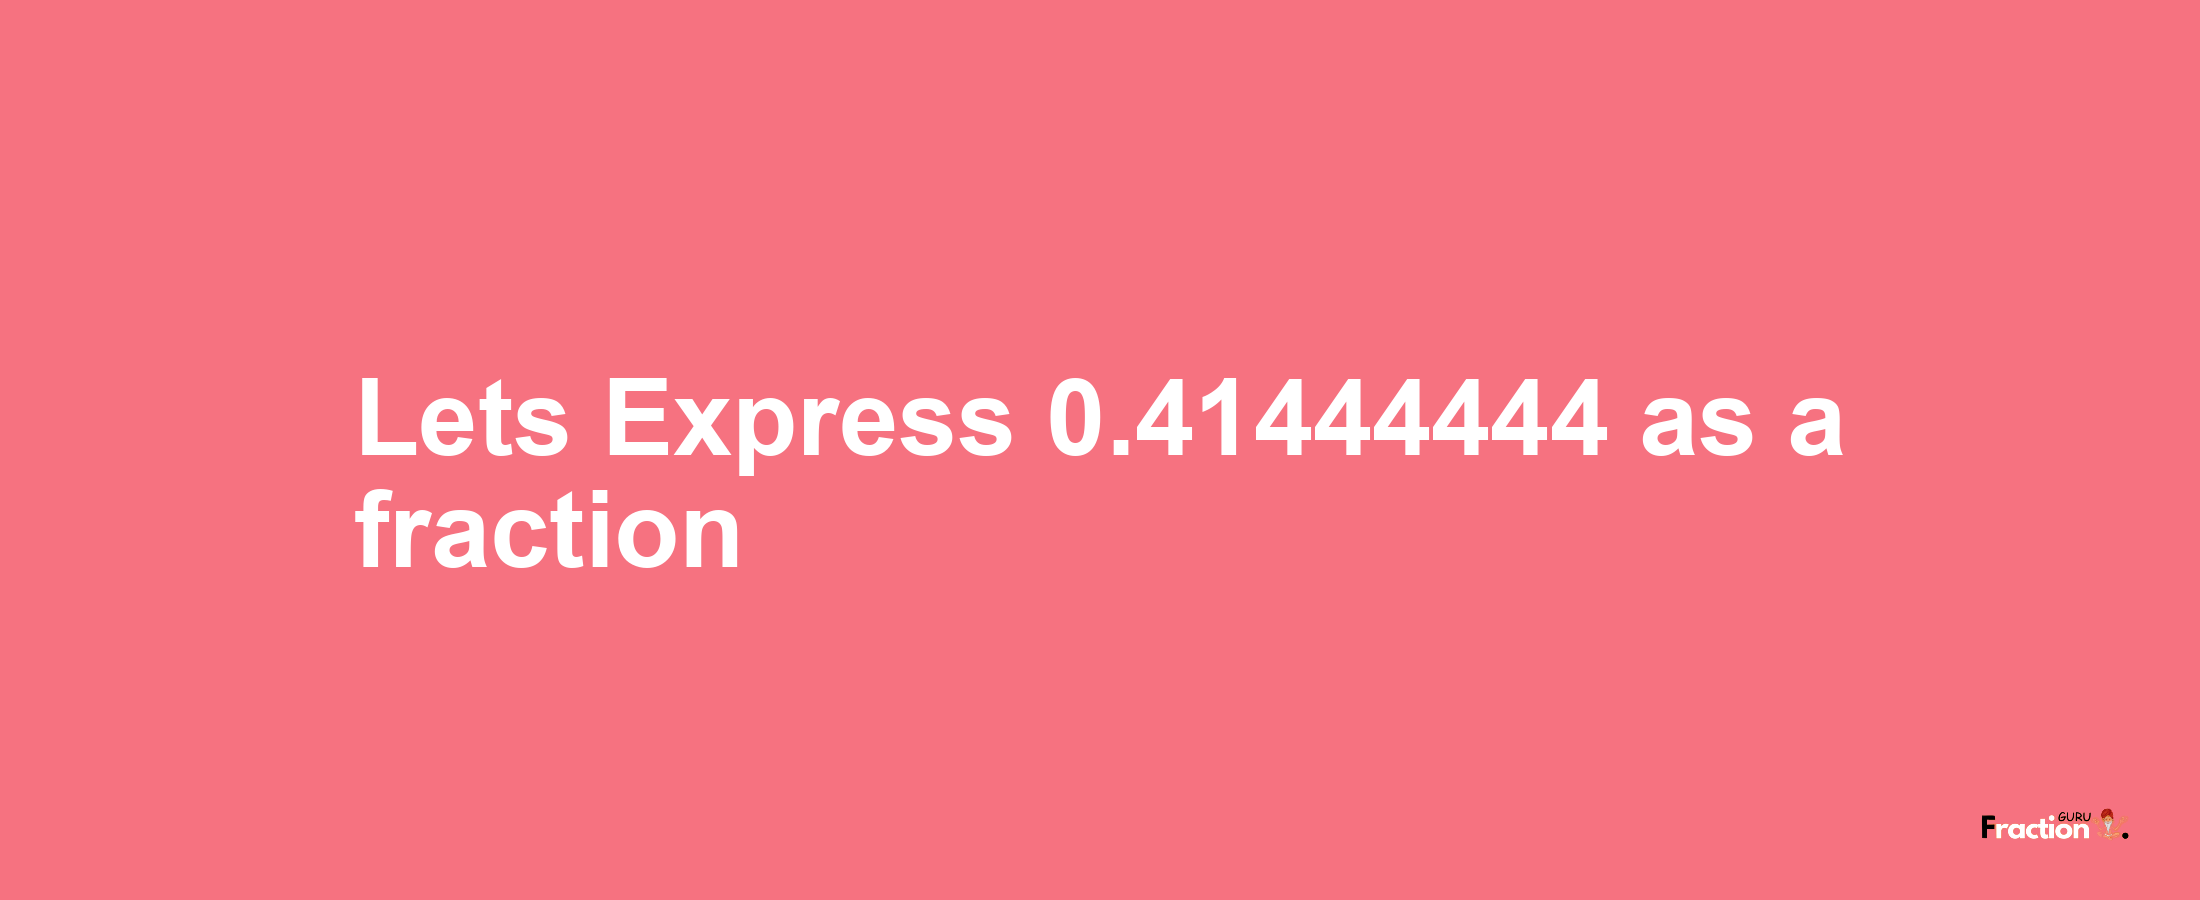 Lets Express 0.41444444 as afraction